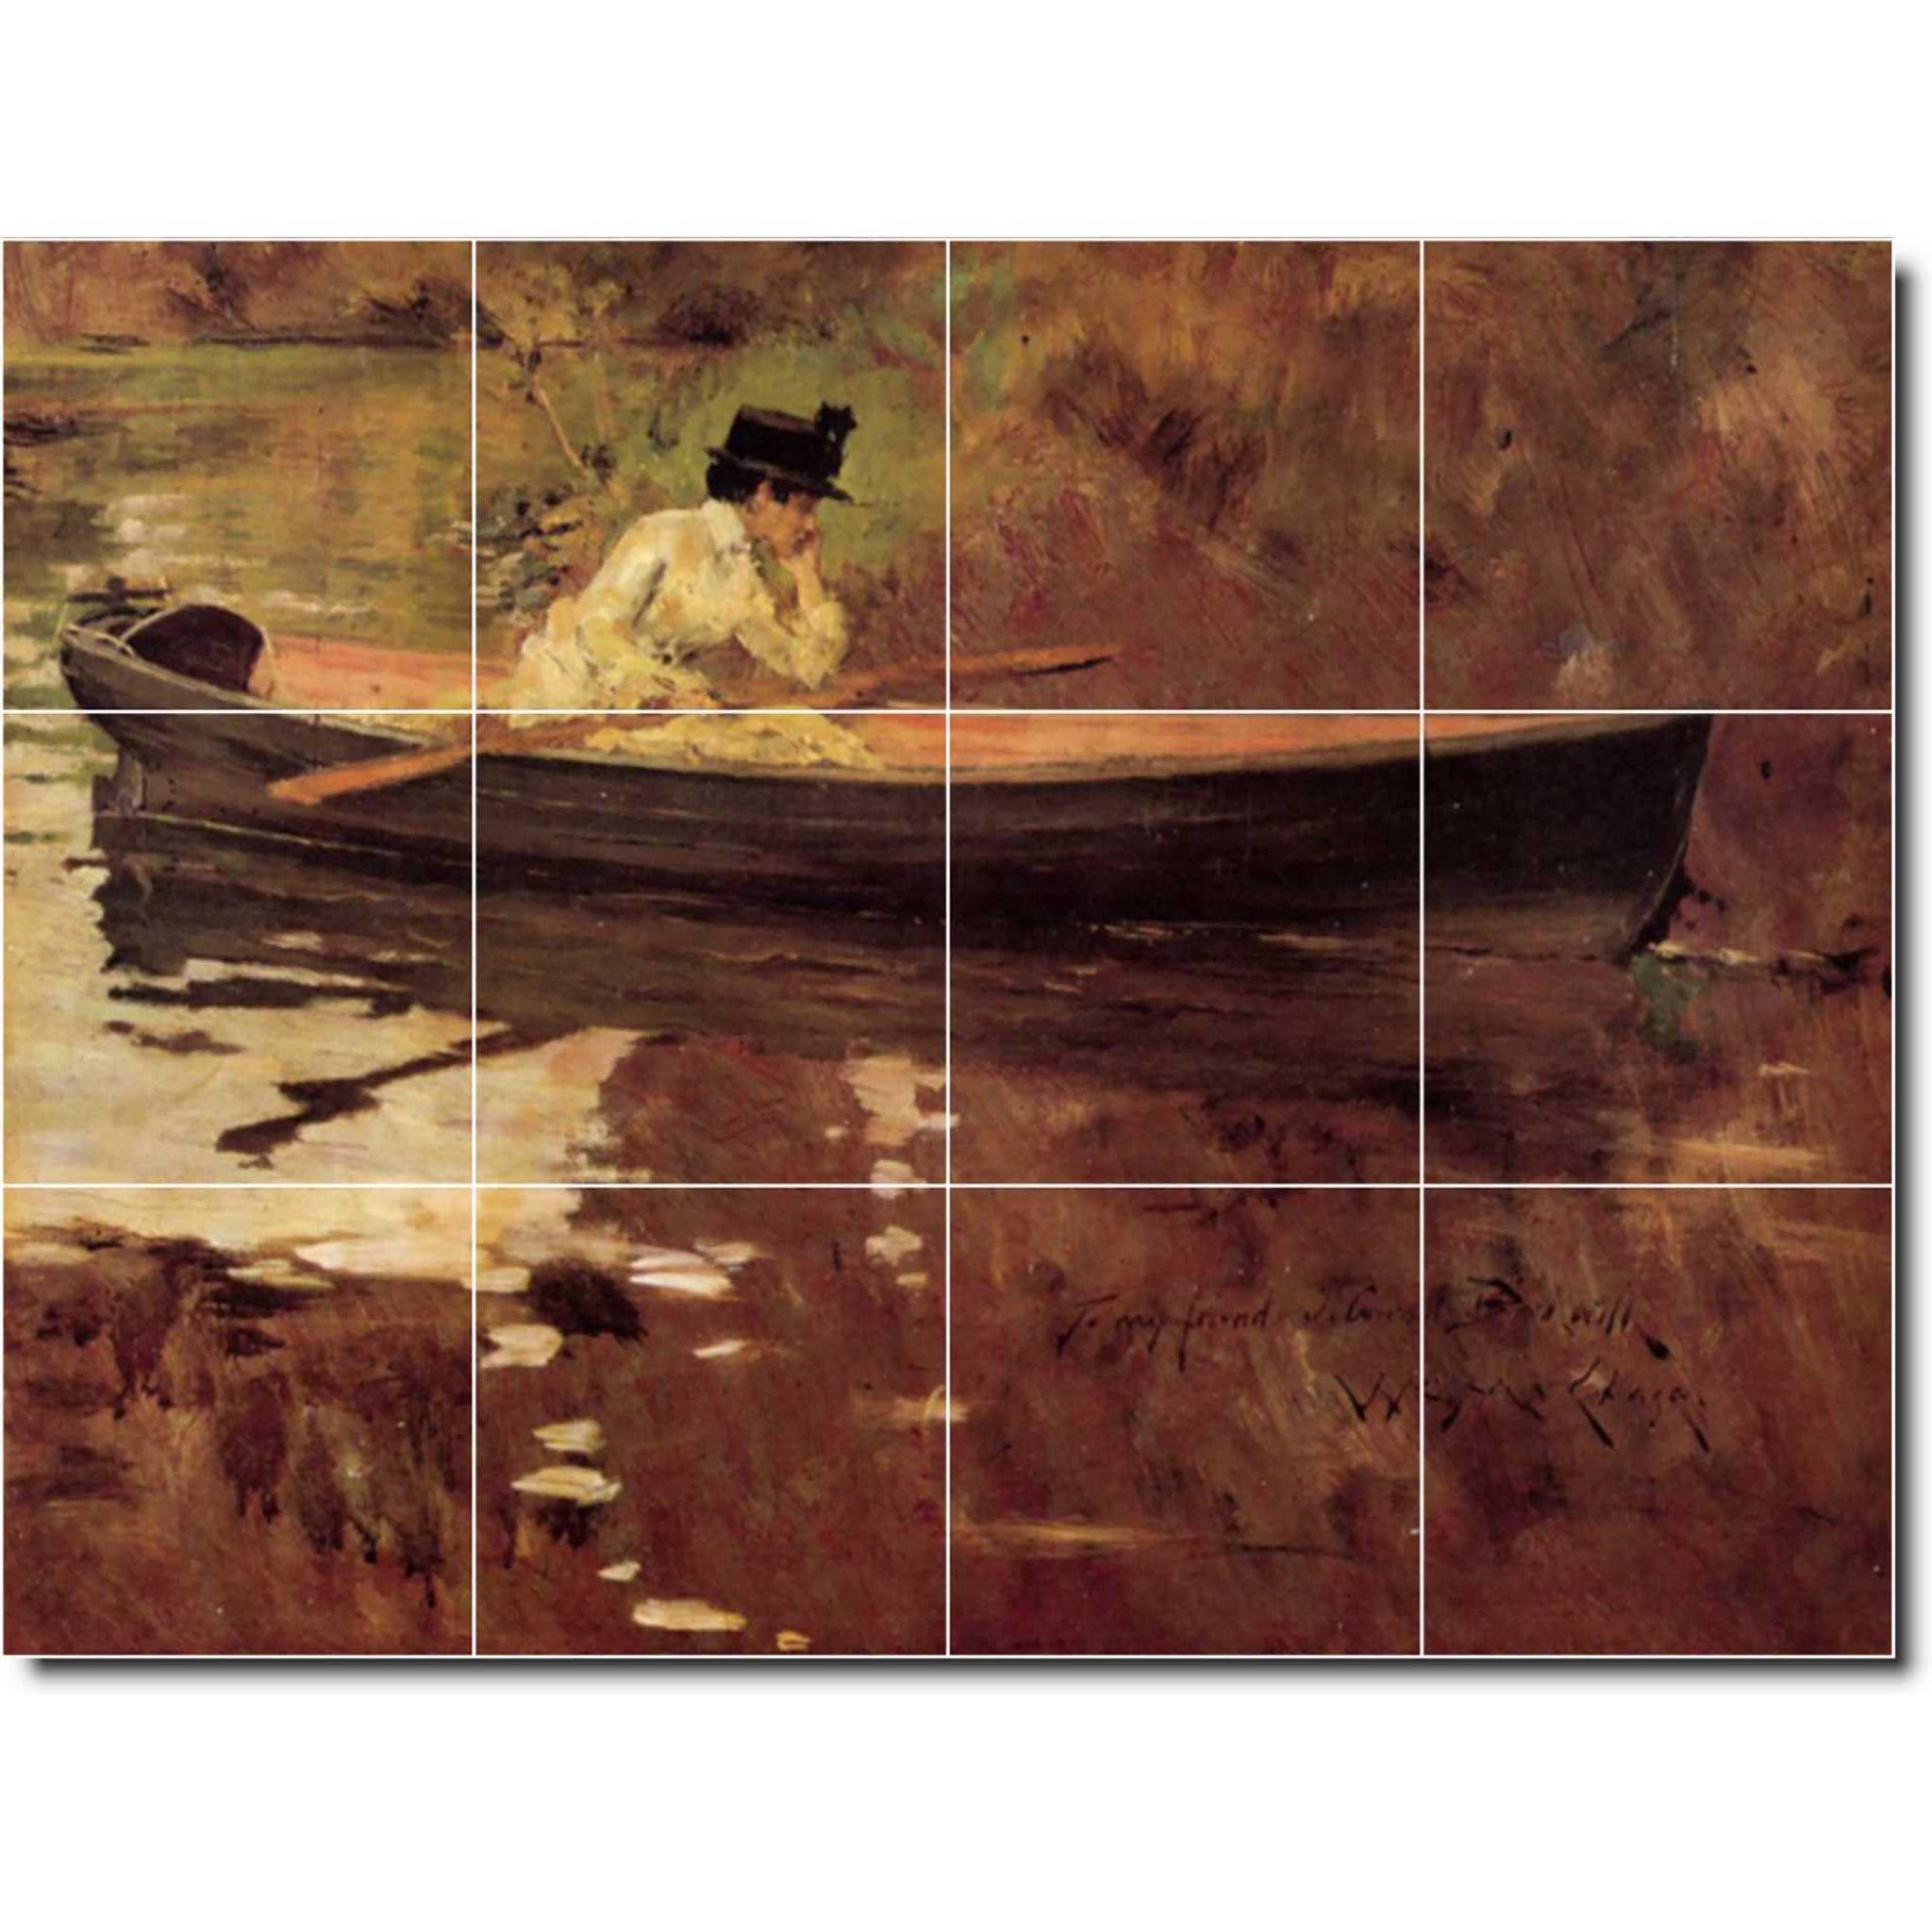 william chase woman painting ceramic tile mural p01567